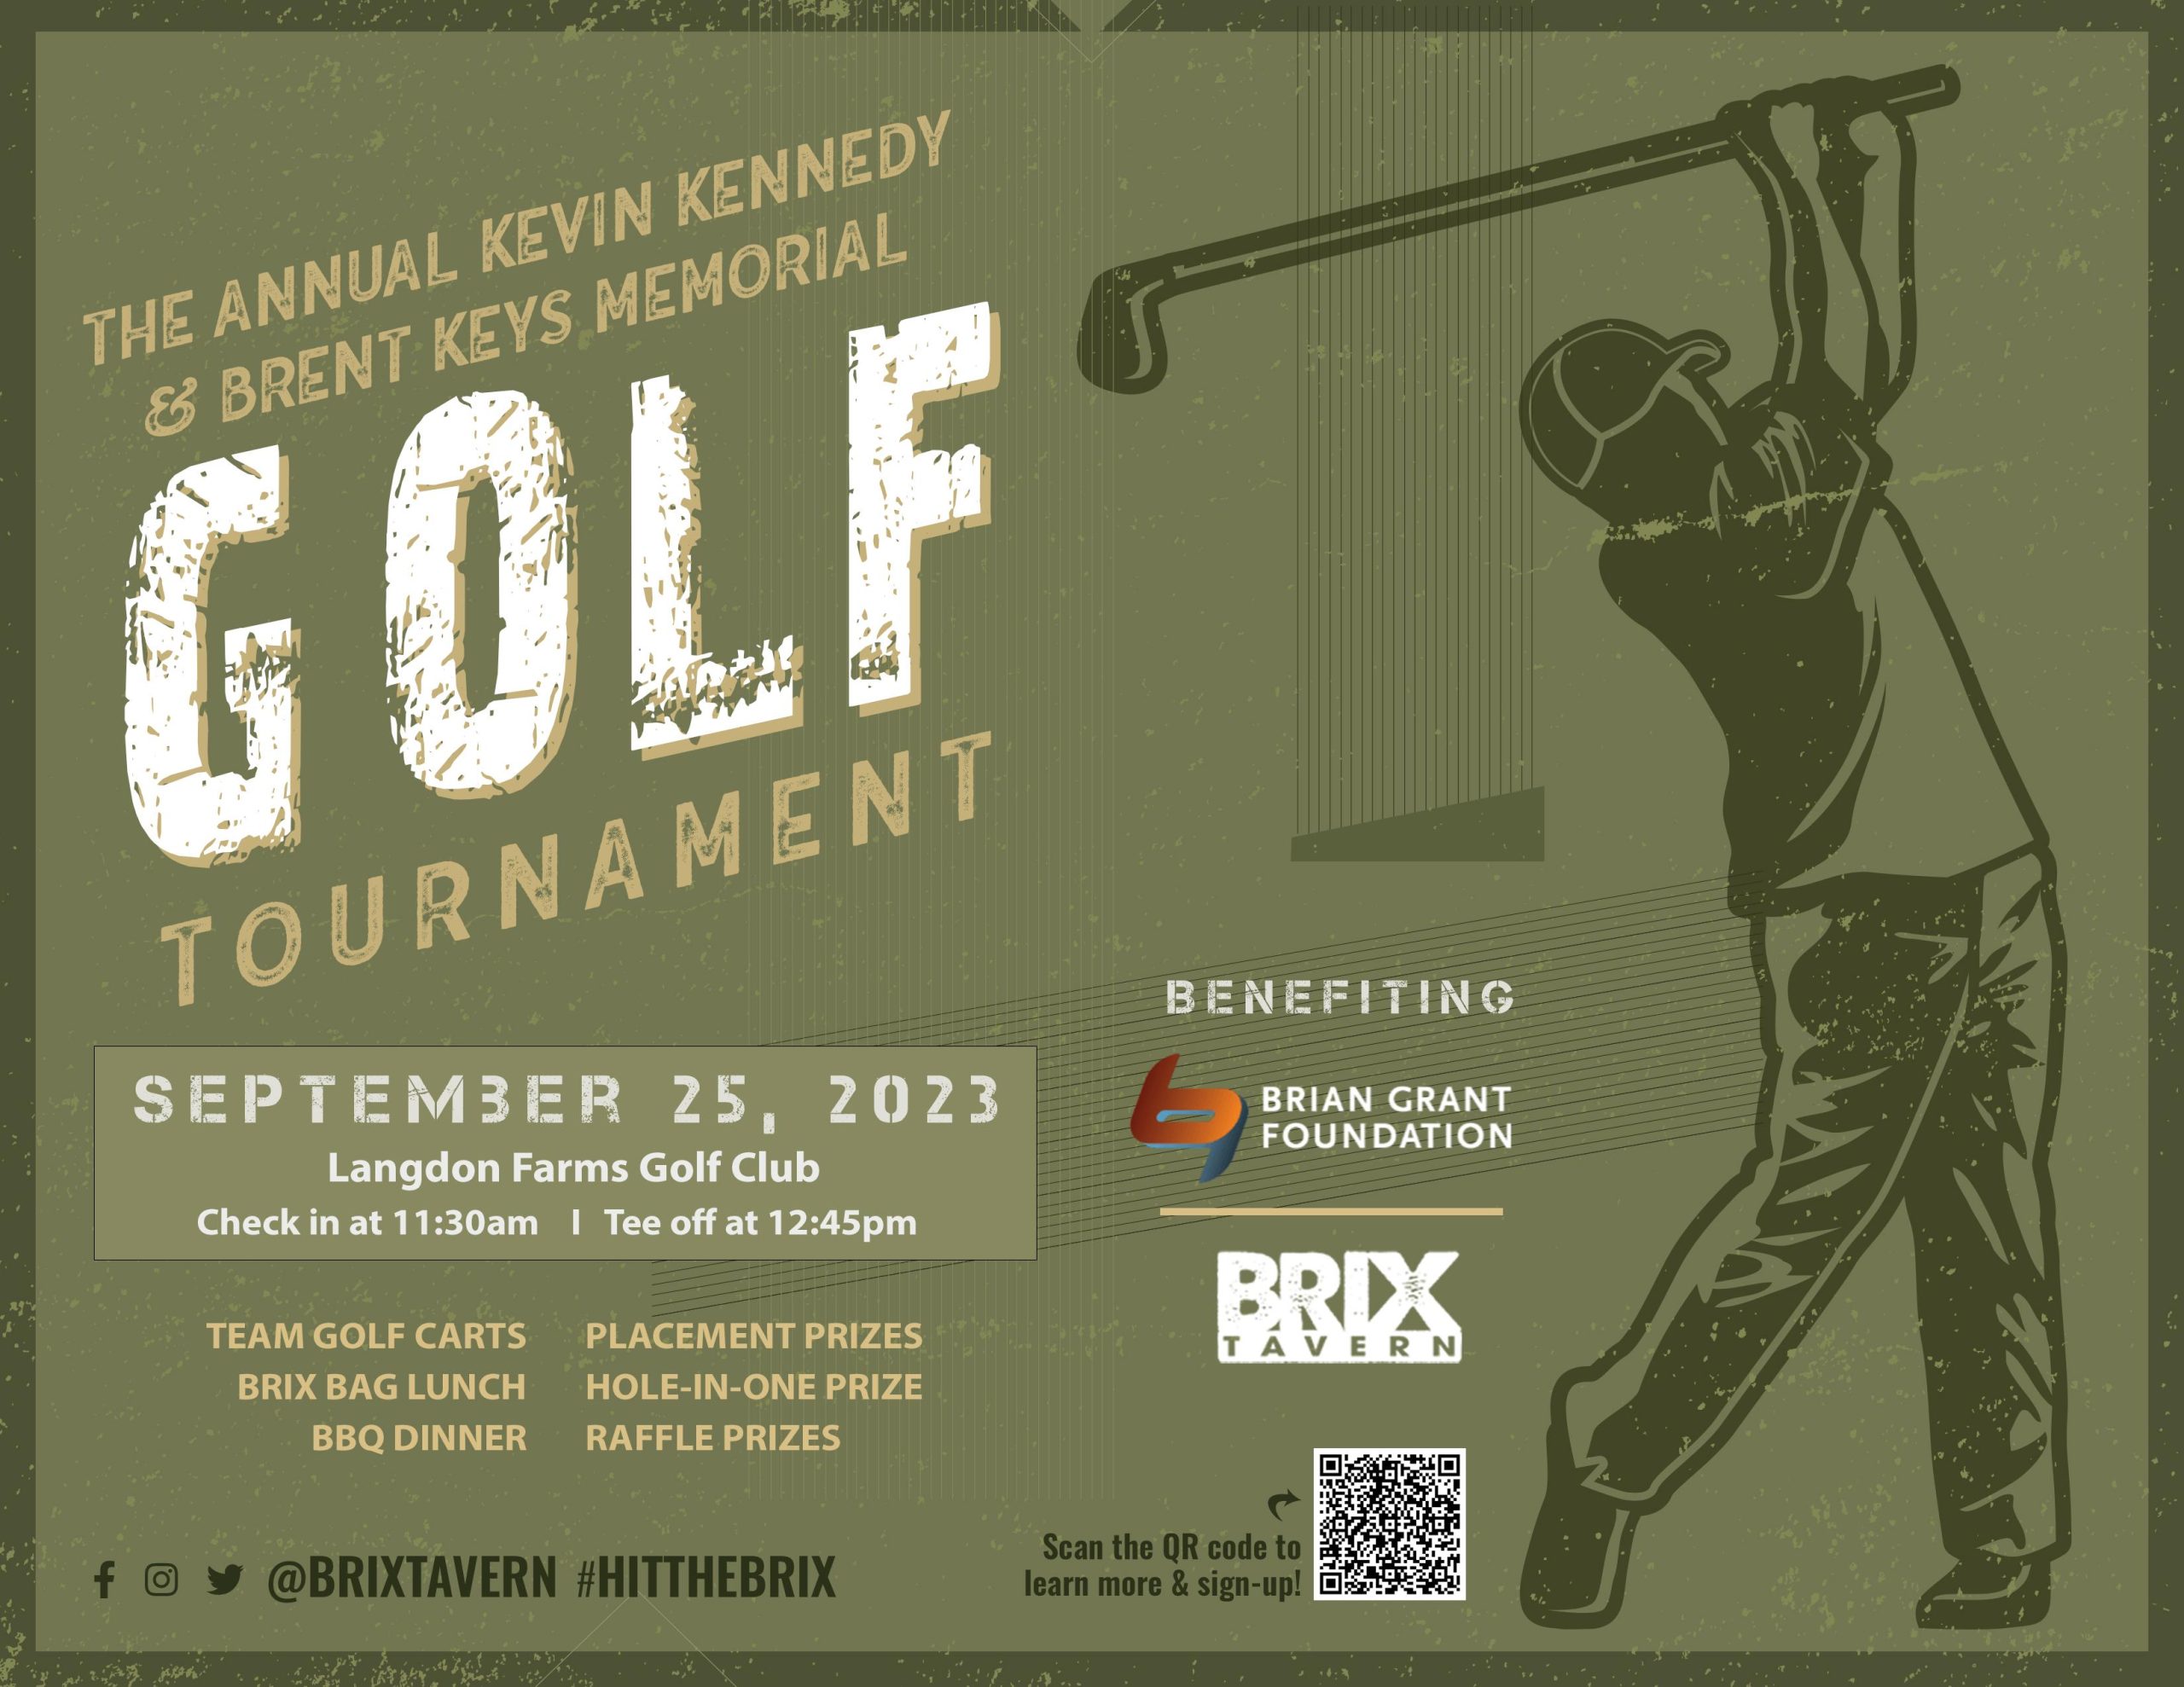 BRIX Tavern's Annual Kevin Kennedy and Brent Keys Golf Tournament